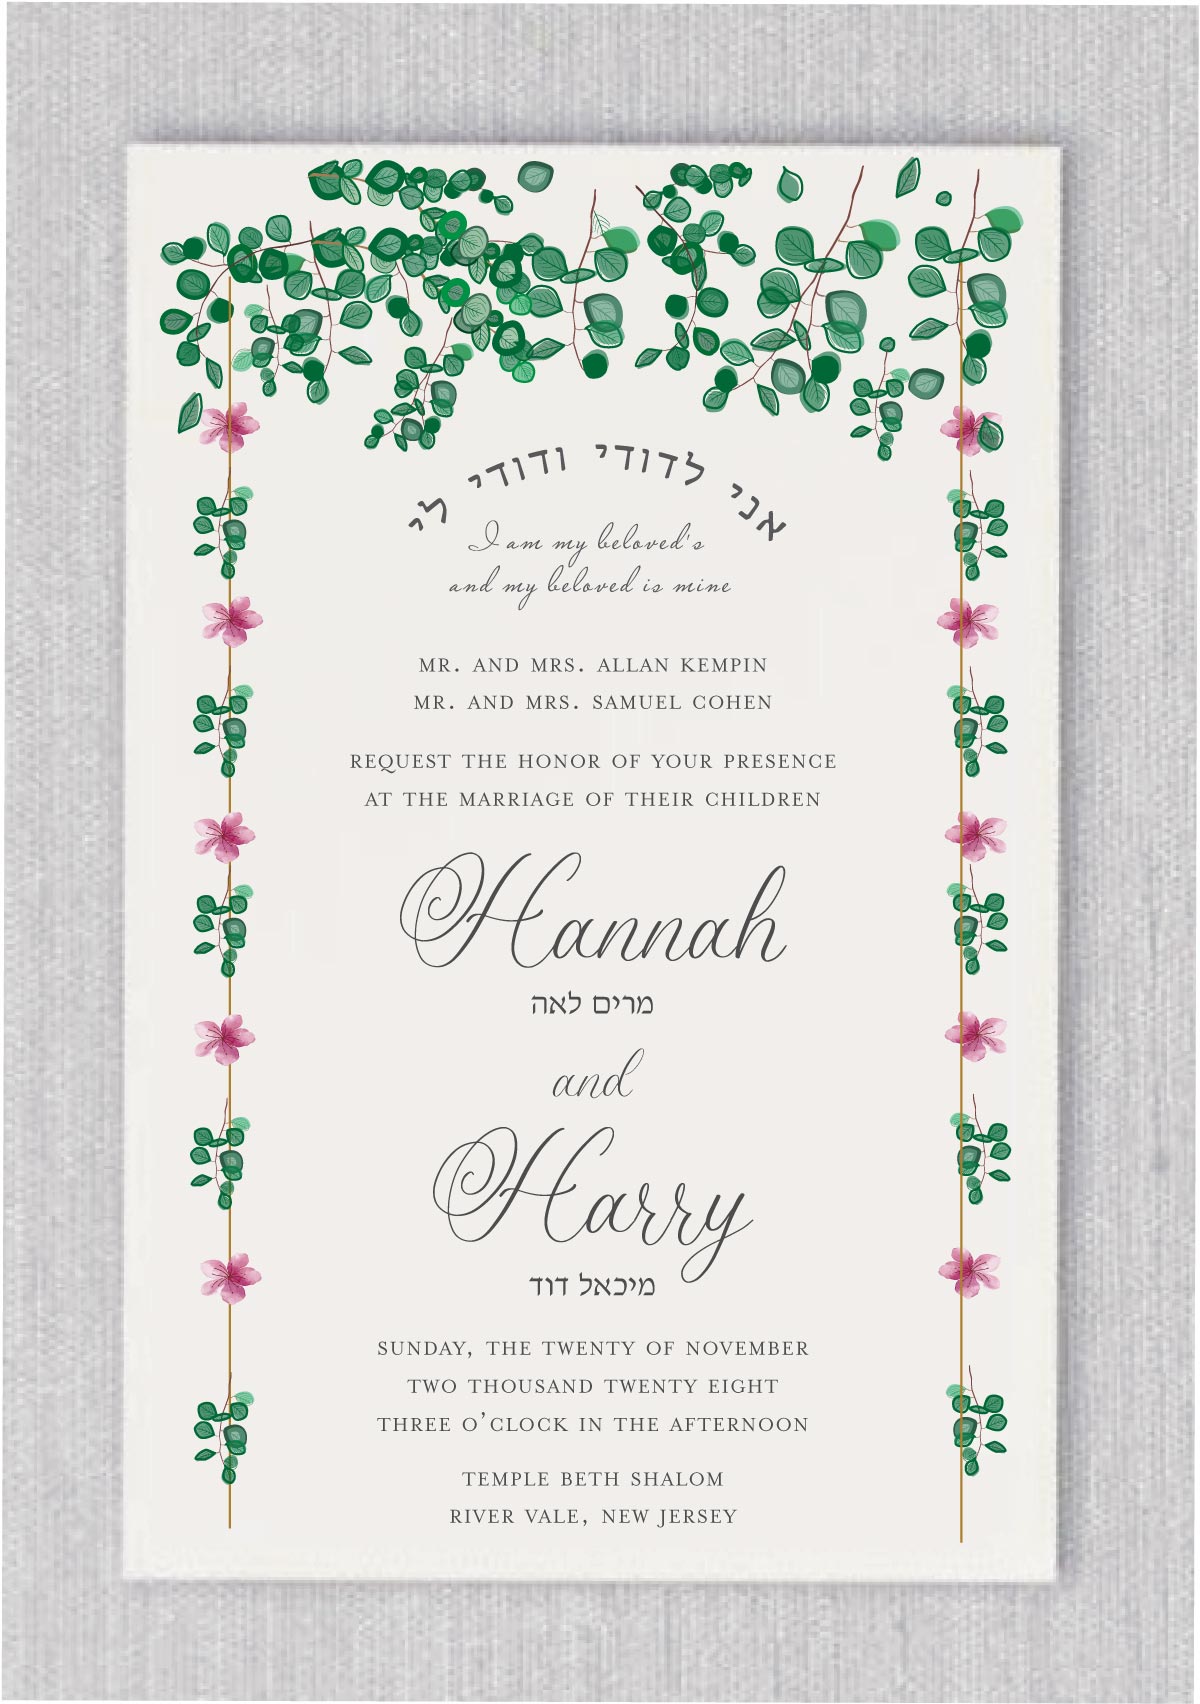 Watercolor Greenery Chuppah – Jewish Wedding Invitation is a perfect blend of modernity and tradition. The invitation features a beautifully hand-drawn chuppah with striking flowers and greenery leaves adorning the sides of the wedding invitation. The text “I am my beloved’s and my beloved is mine” is arch designed in both Hebrew and English, showcasing the essence of a Jewish wedding.